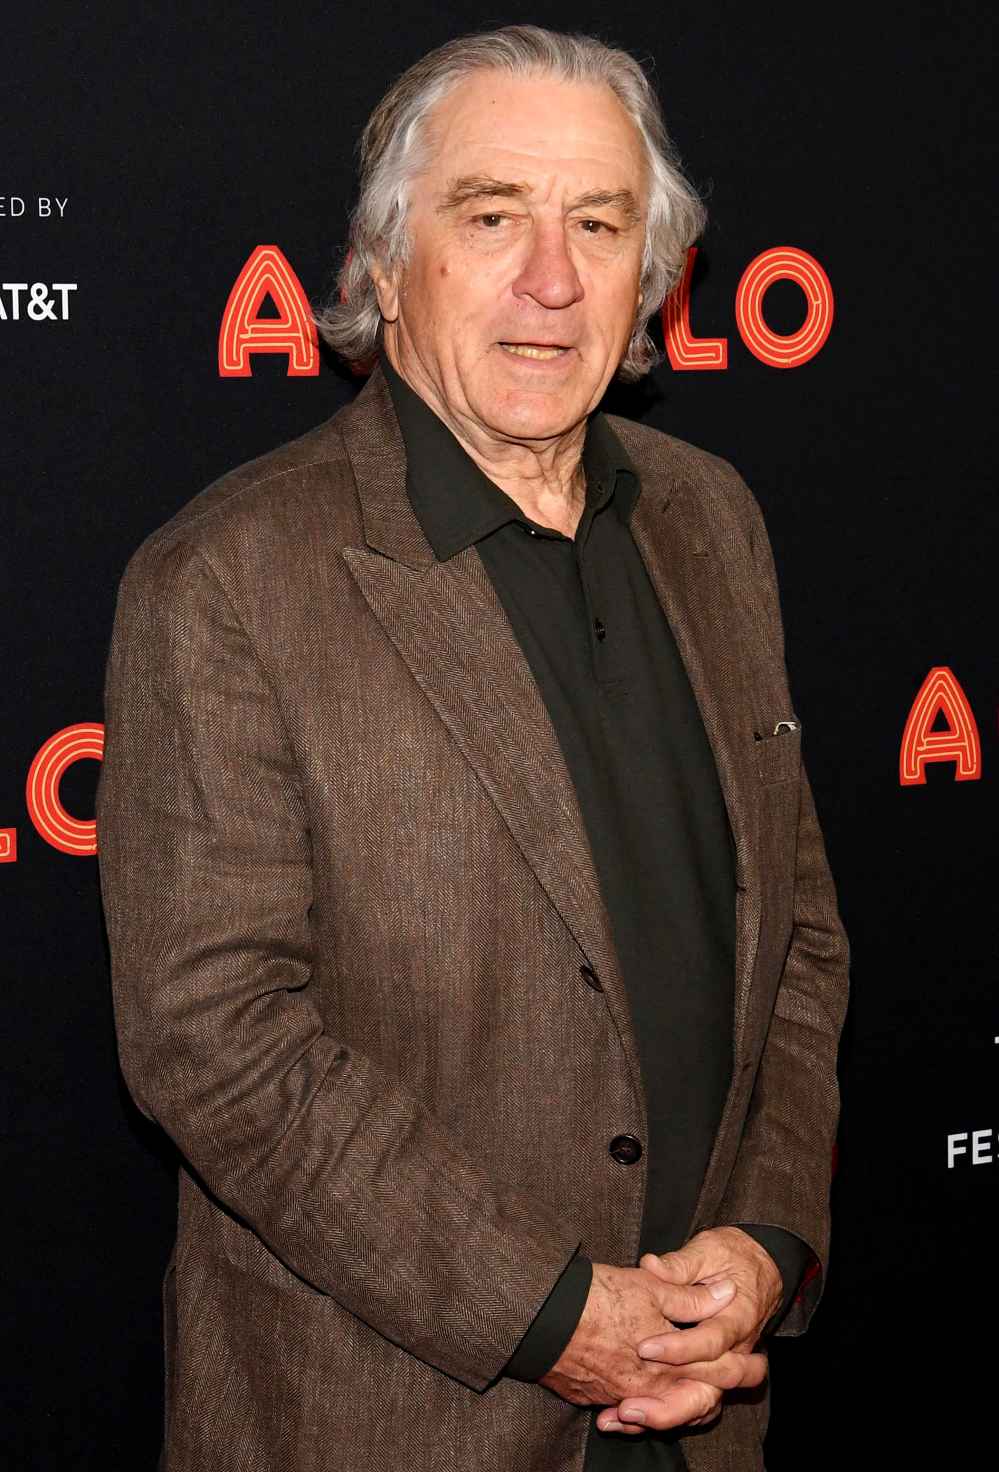 Robert De Niro Lawyer Denies Absurd Abuse Claim by Actor Ex-Assistant